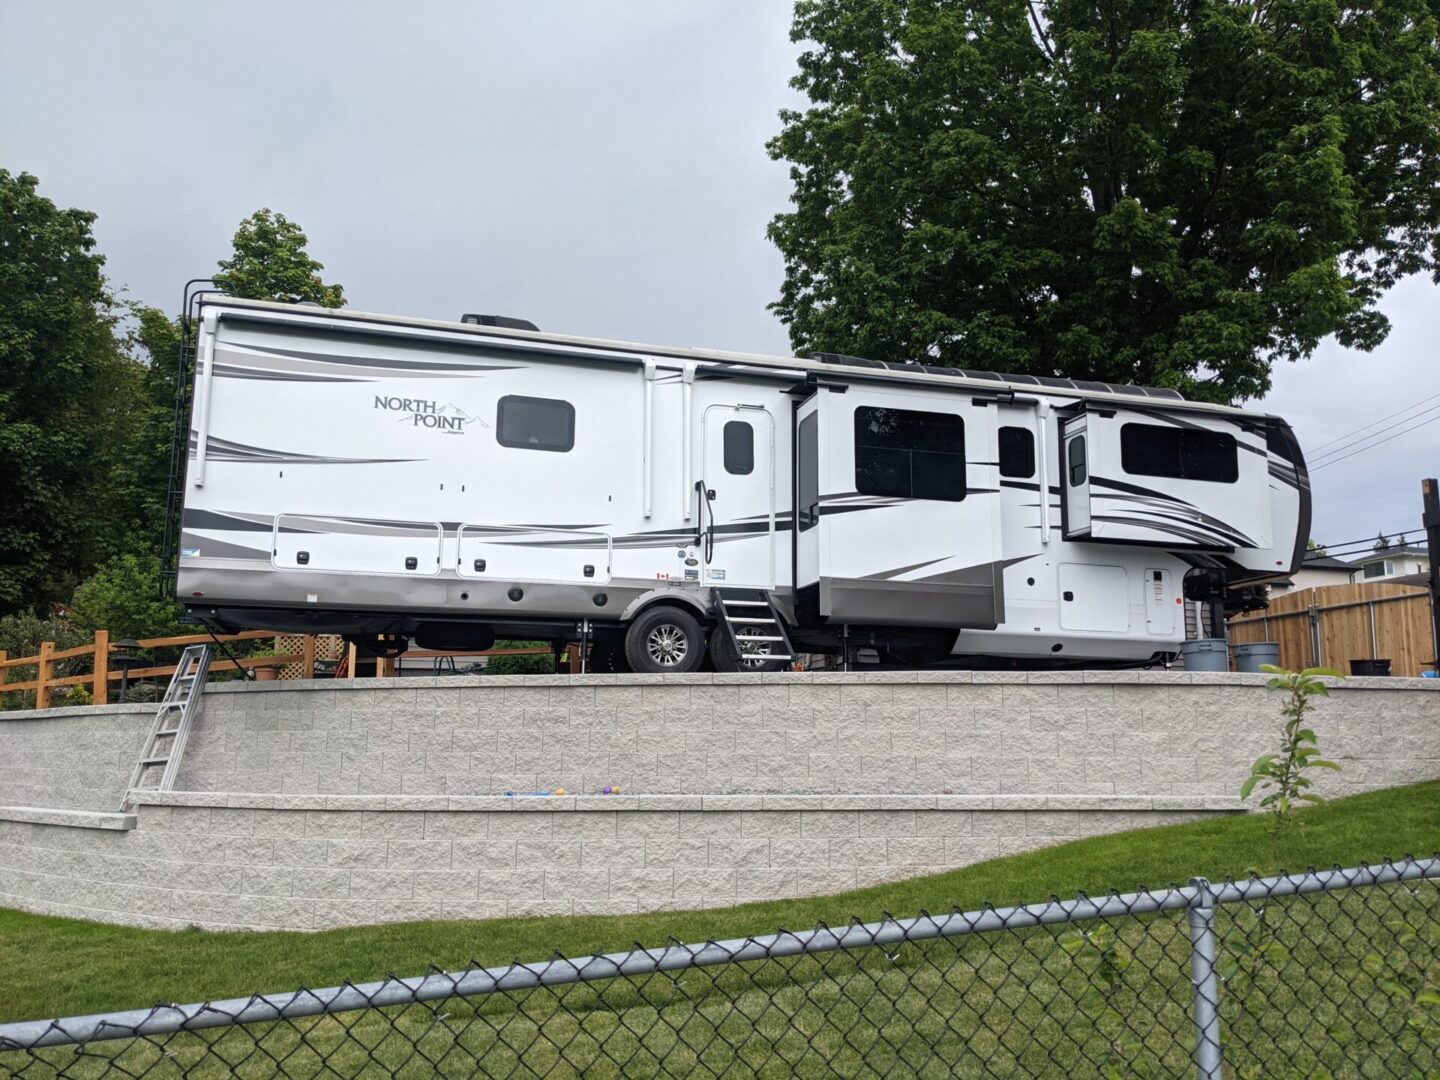 A large, modern north point rv parked on a gravel lot, featuring multiple slide-outs and a small set of stairs leading up to a door.